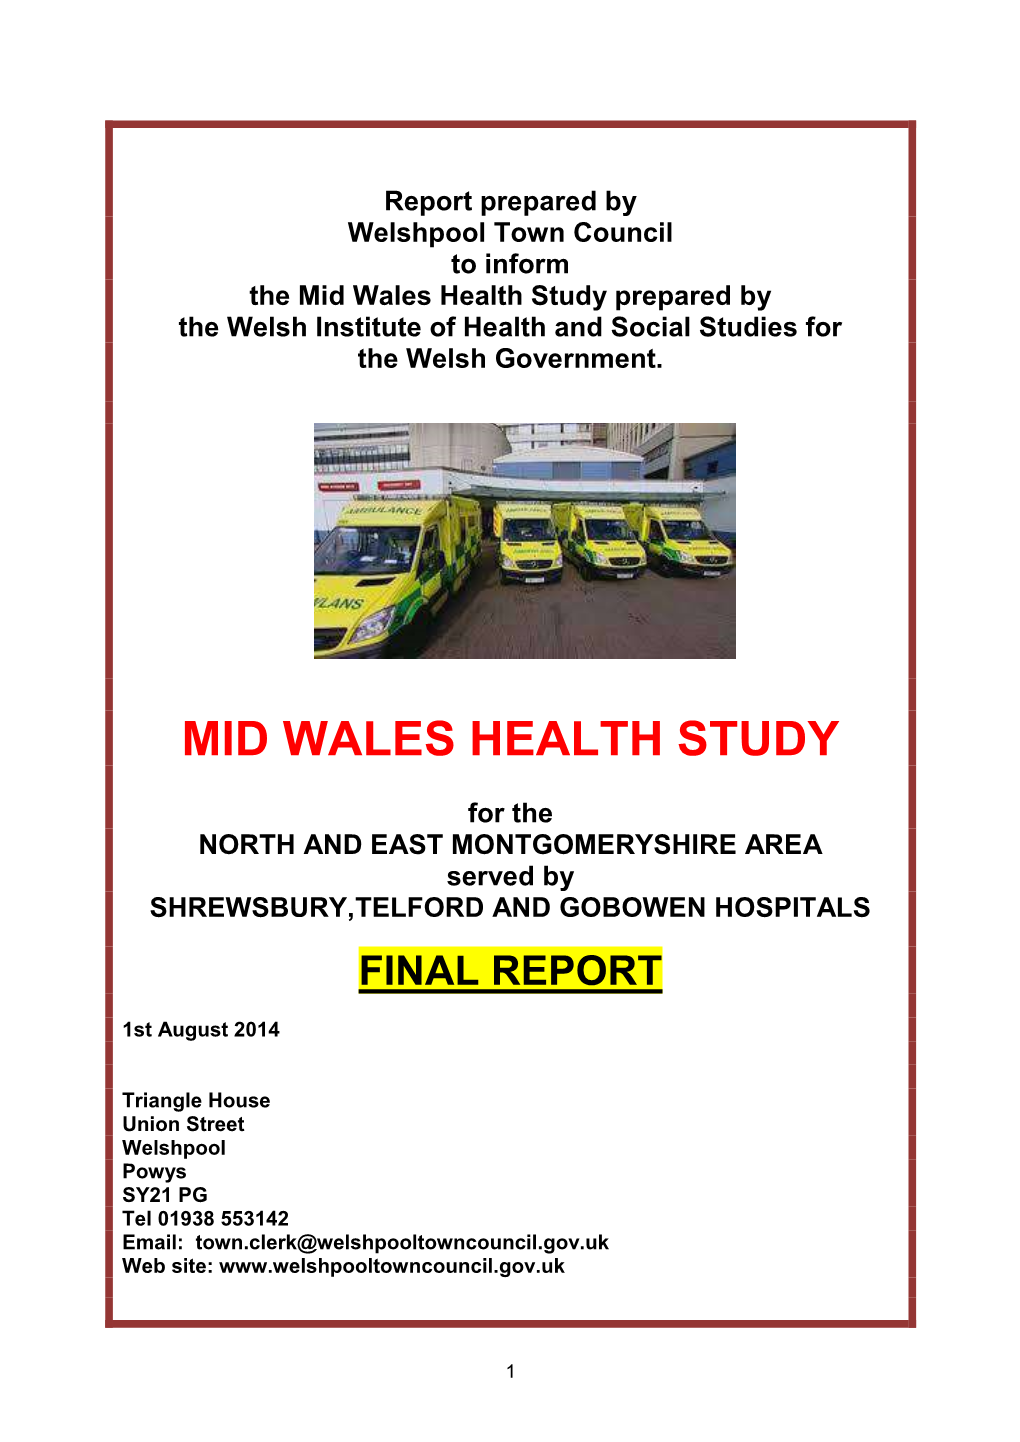 Mid Wales Health Study Prepared by the Welsh Institute of Health and Social Studies for the Welsh Government